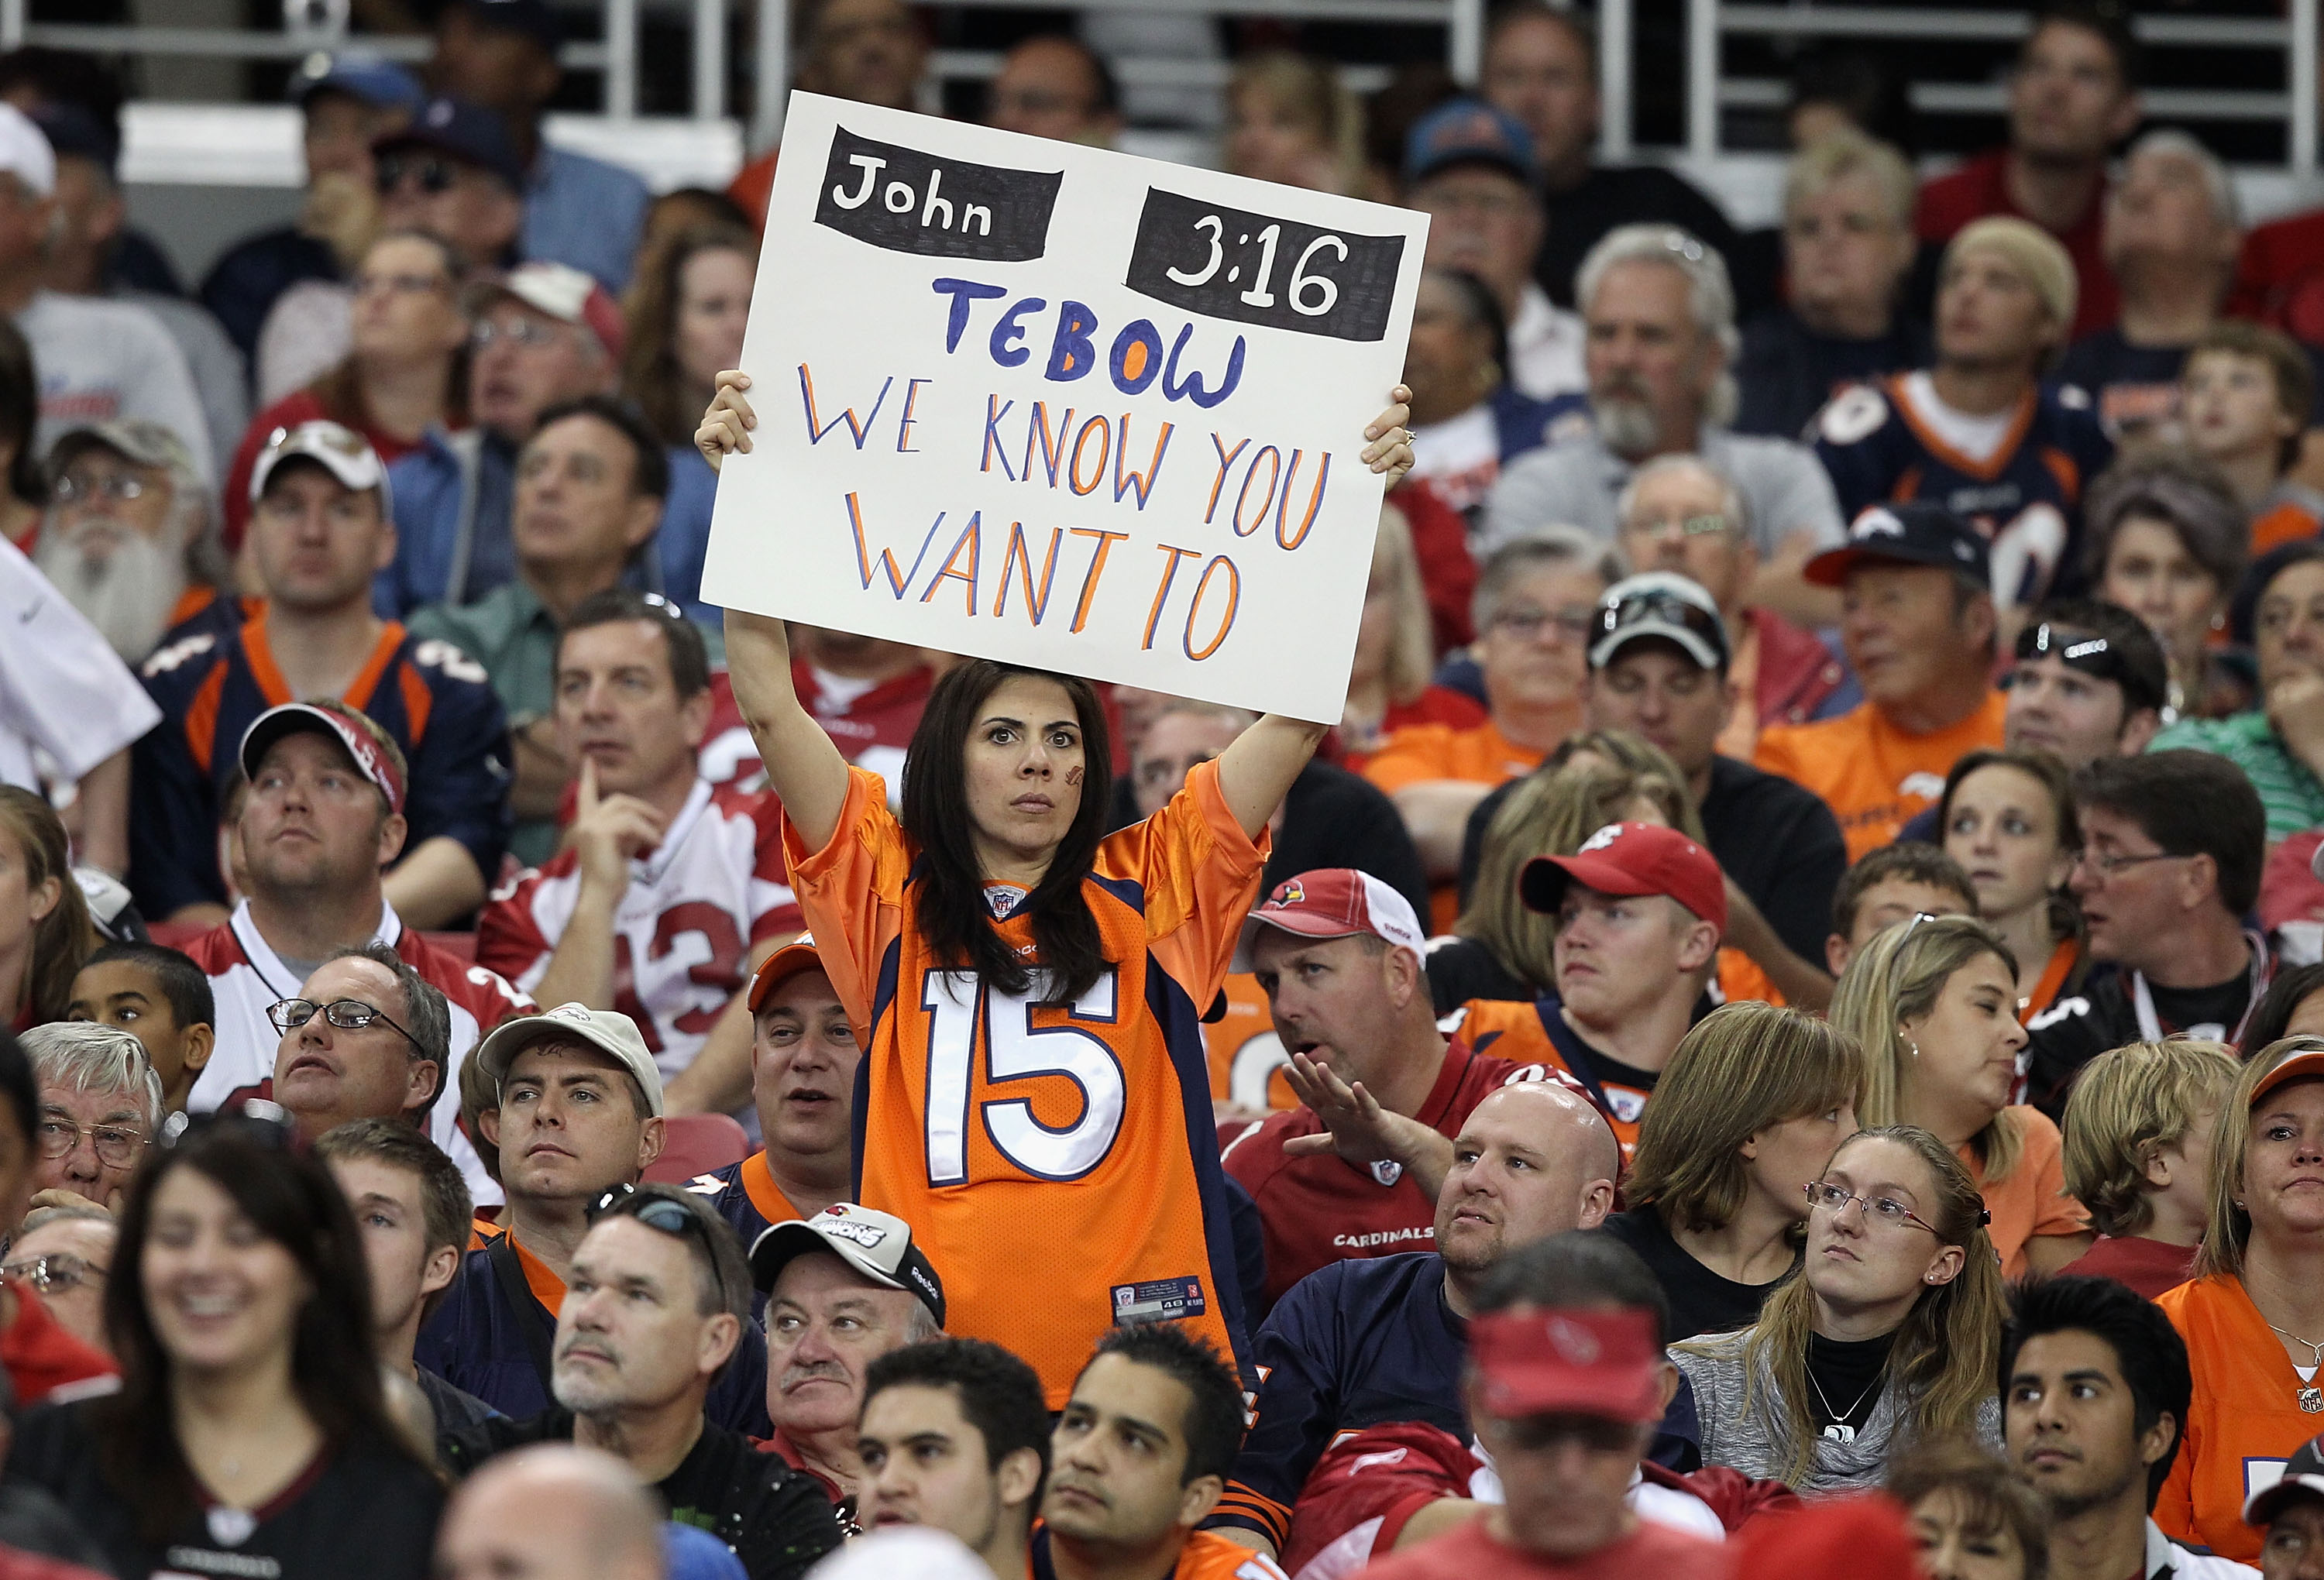 GLENDALE, AZ - DECEMBER 12:  A fan of the Denver Broncos holds up a sign for quarterback Tim Tebow #15 during the NFL game against the Arizona Cardinals at the University of Phoenix Stadium on December 12, 2010 in Glendale, Arizona.  The Cardinals defeate